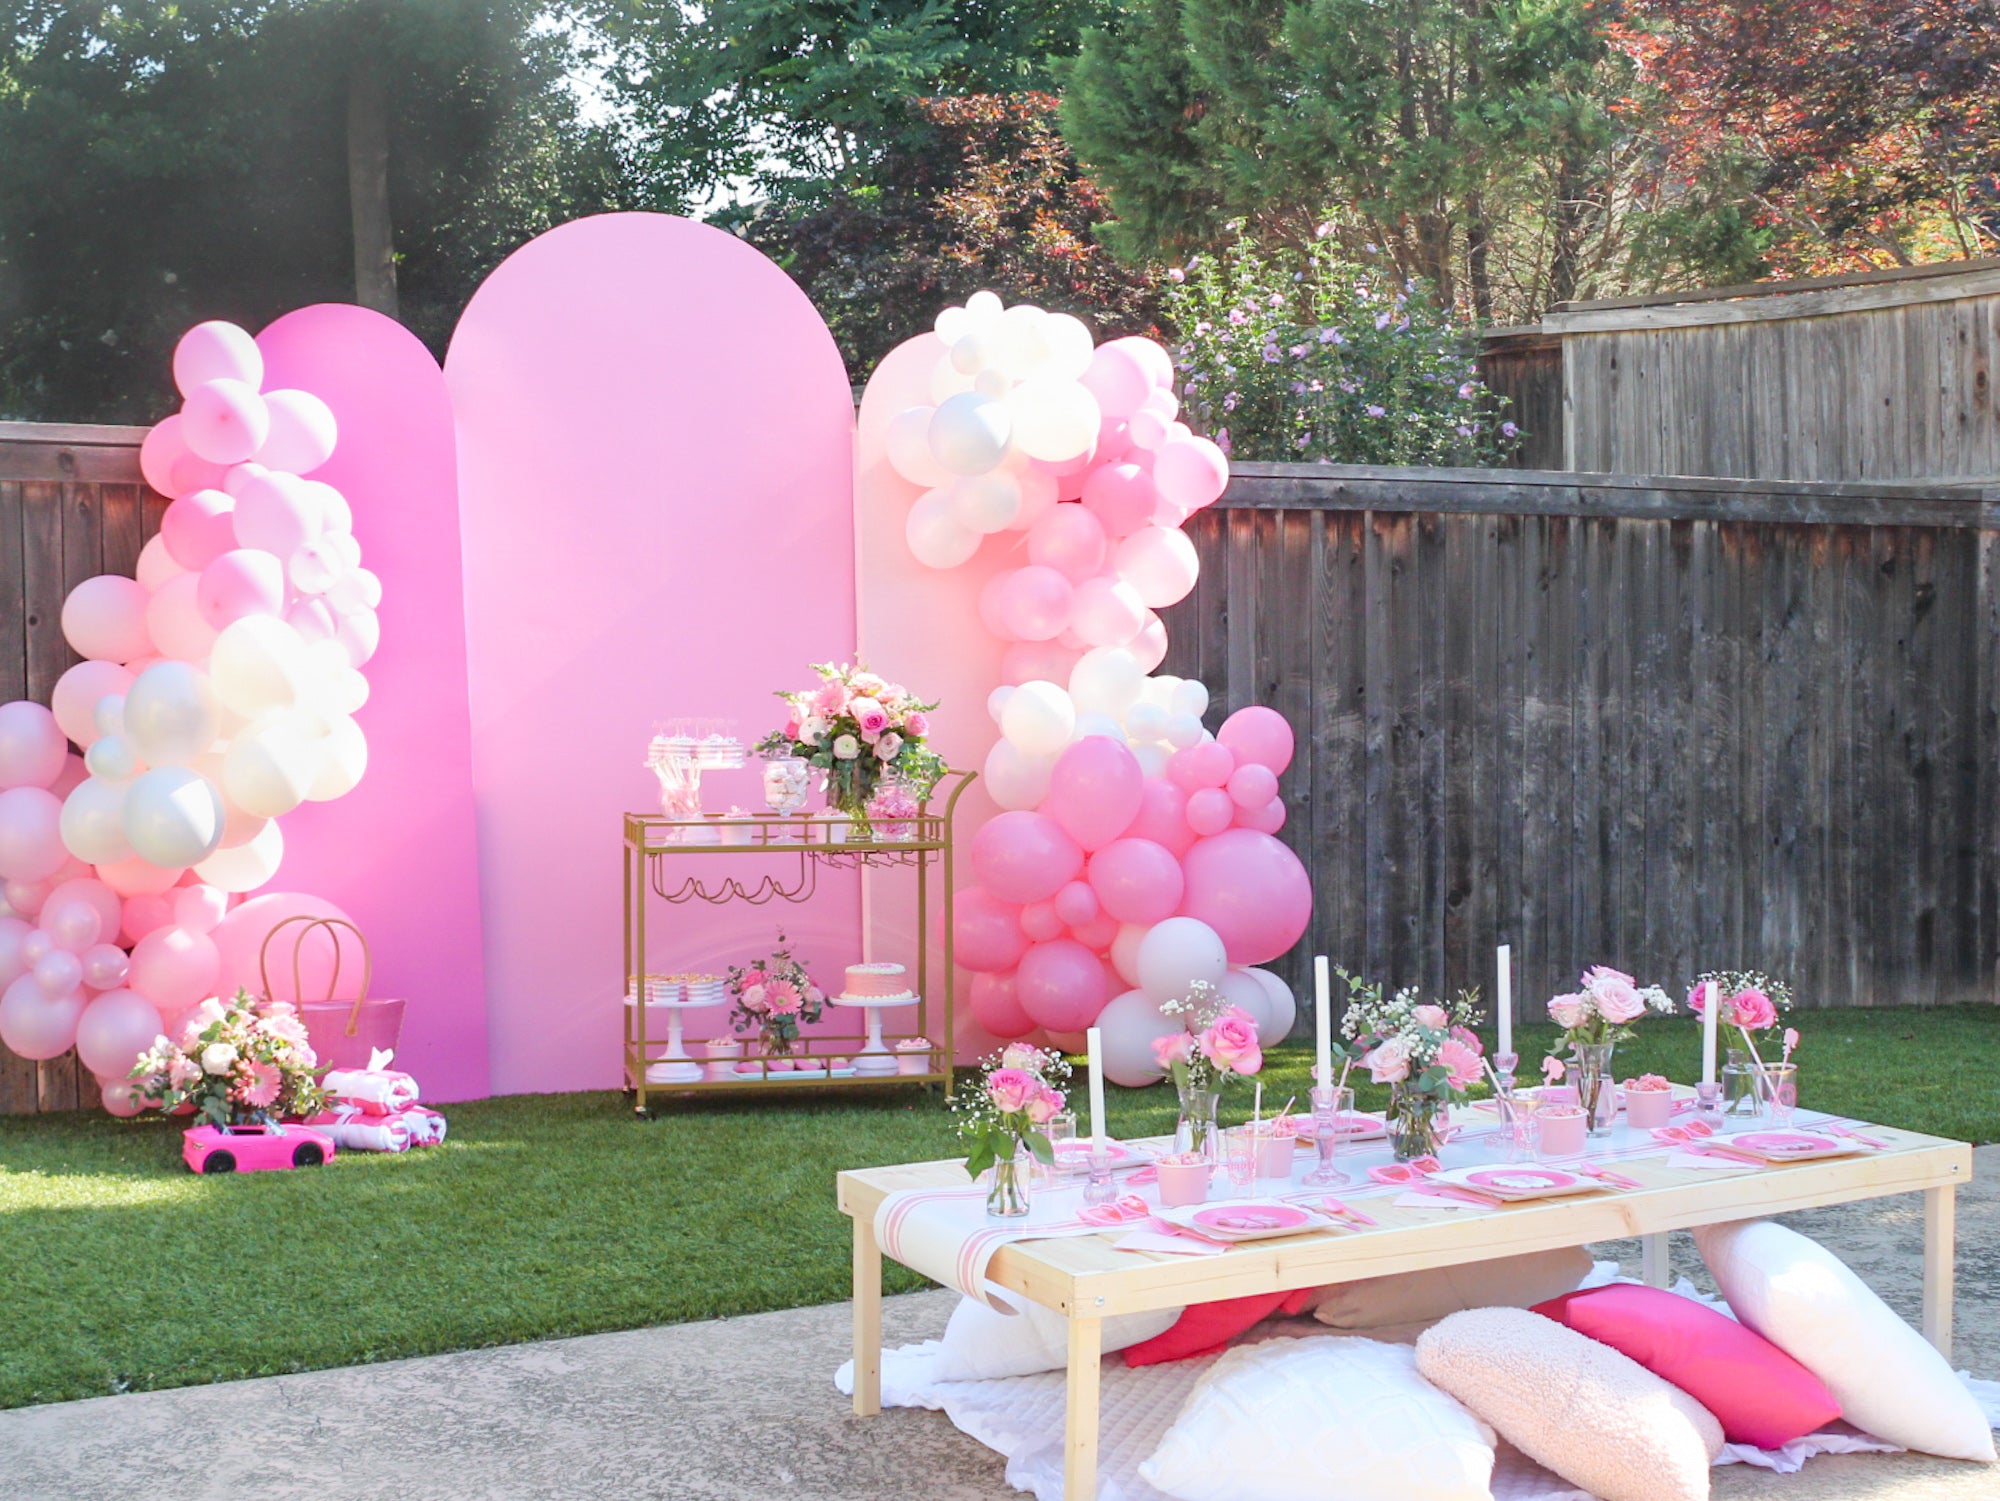 How to Throw a Dolled up Barbie Birthday Party | The Party Darling